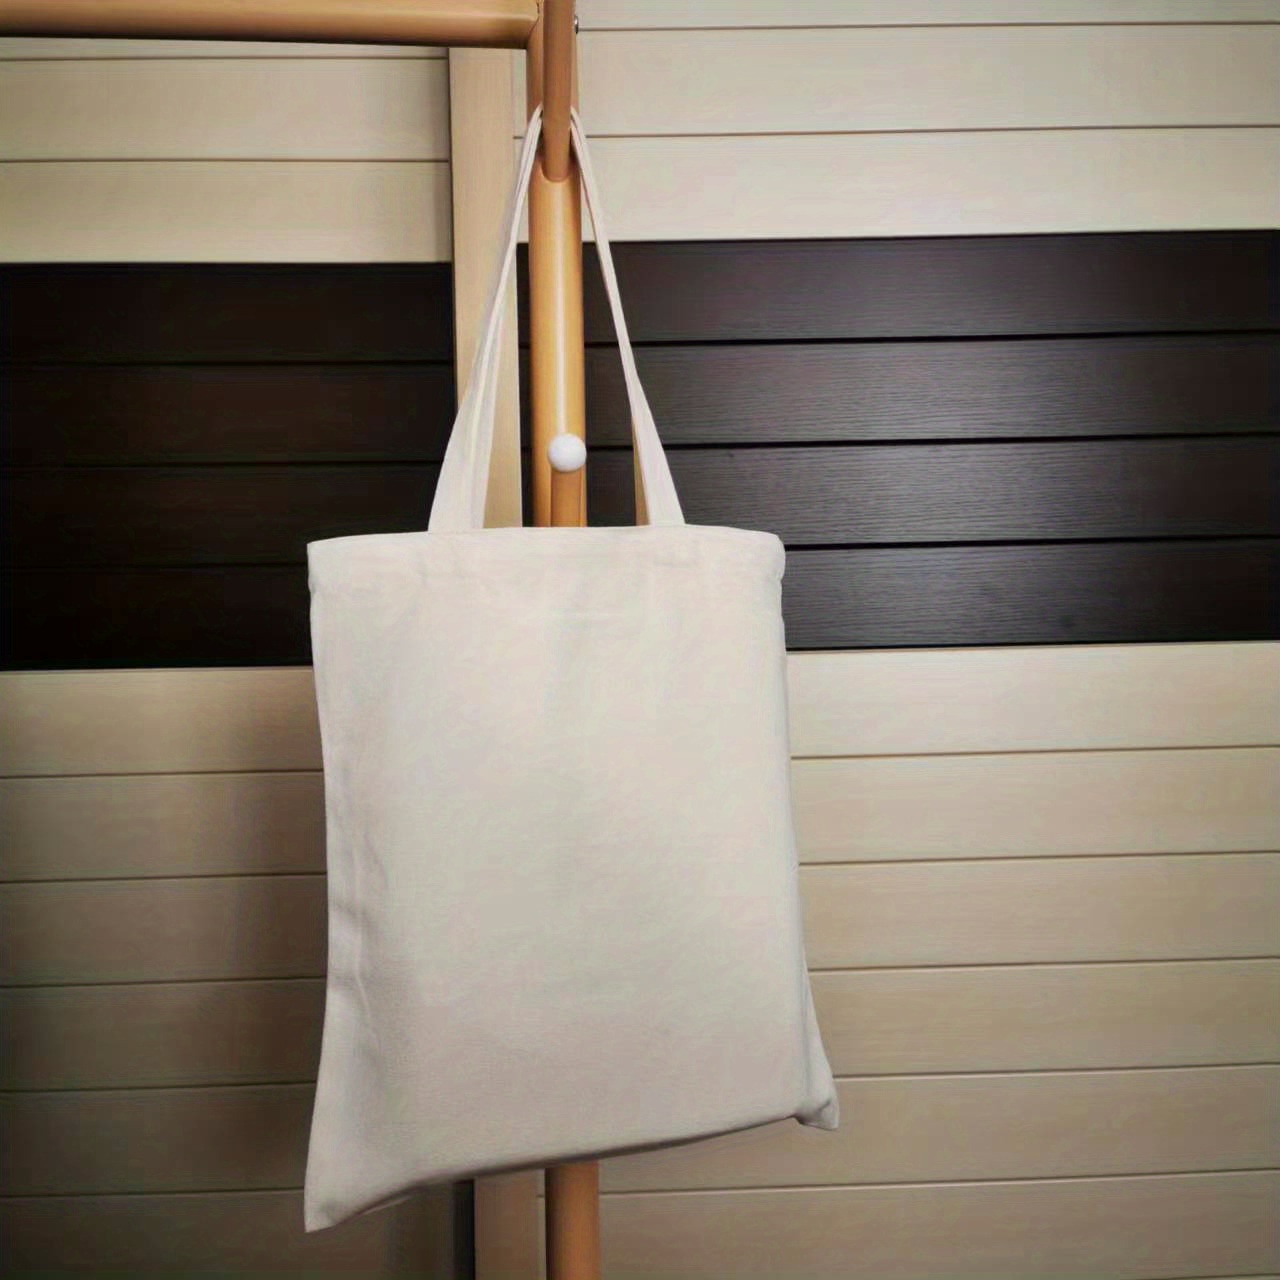 Wholesale tote bags, Cotton sling bags